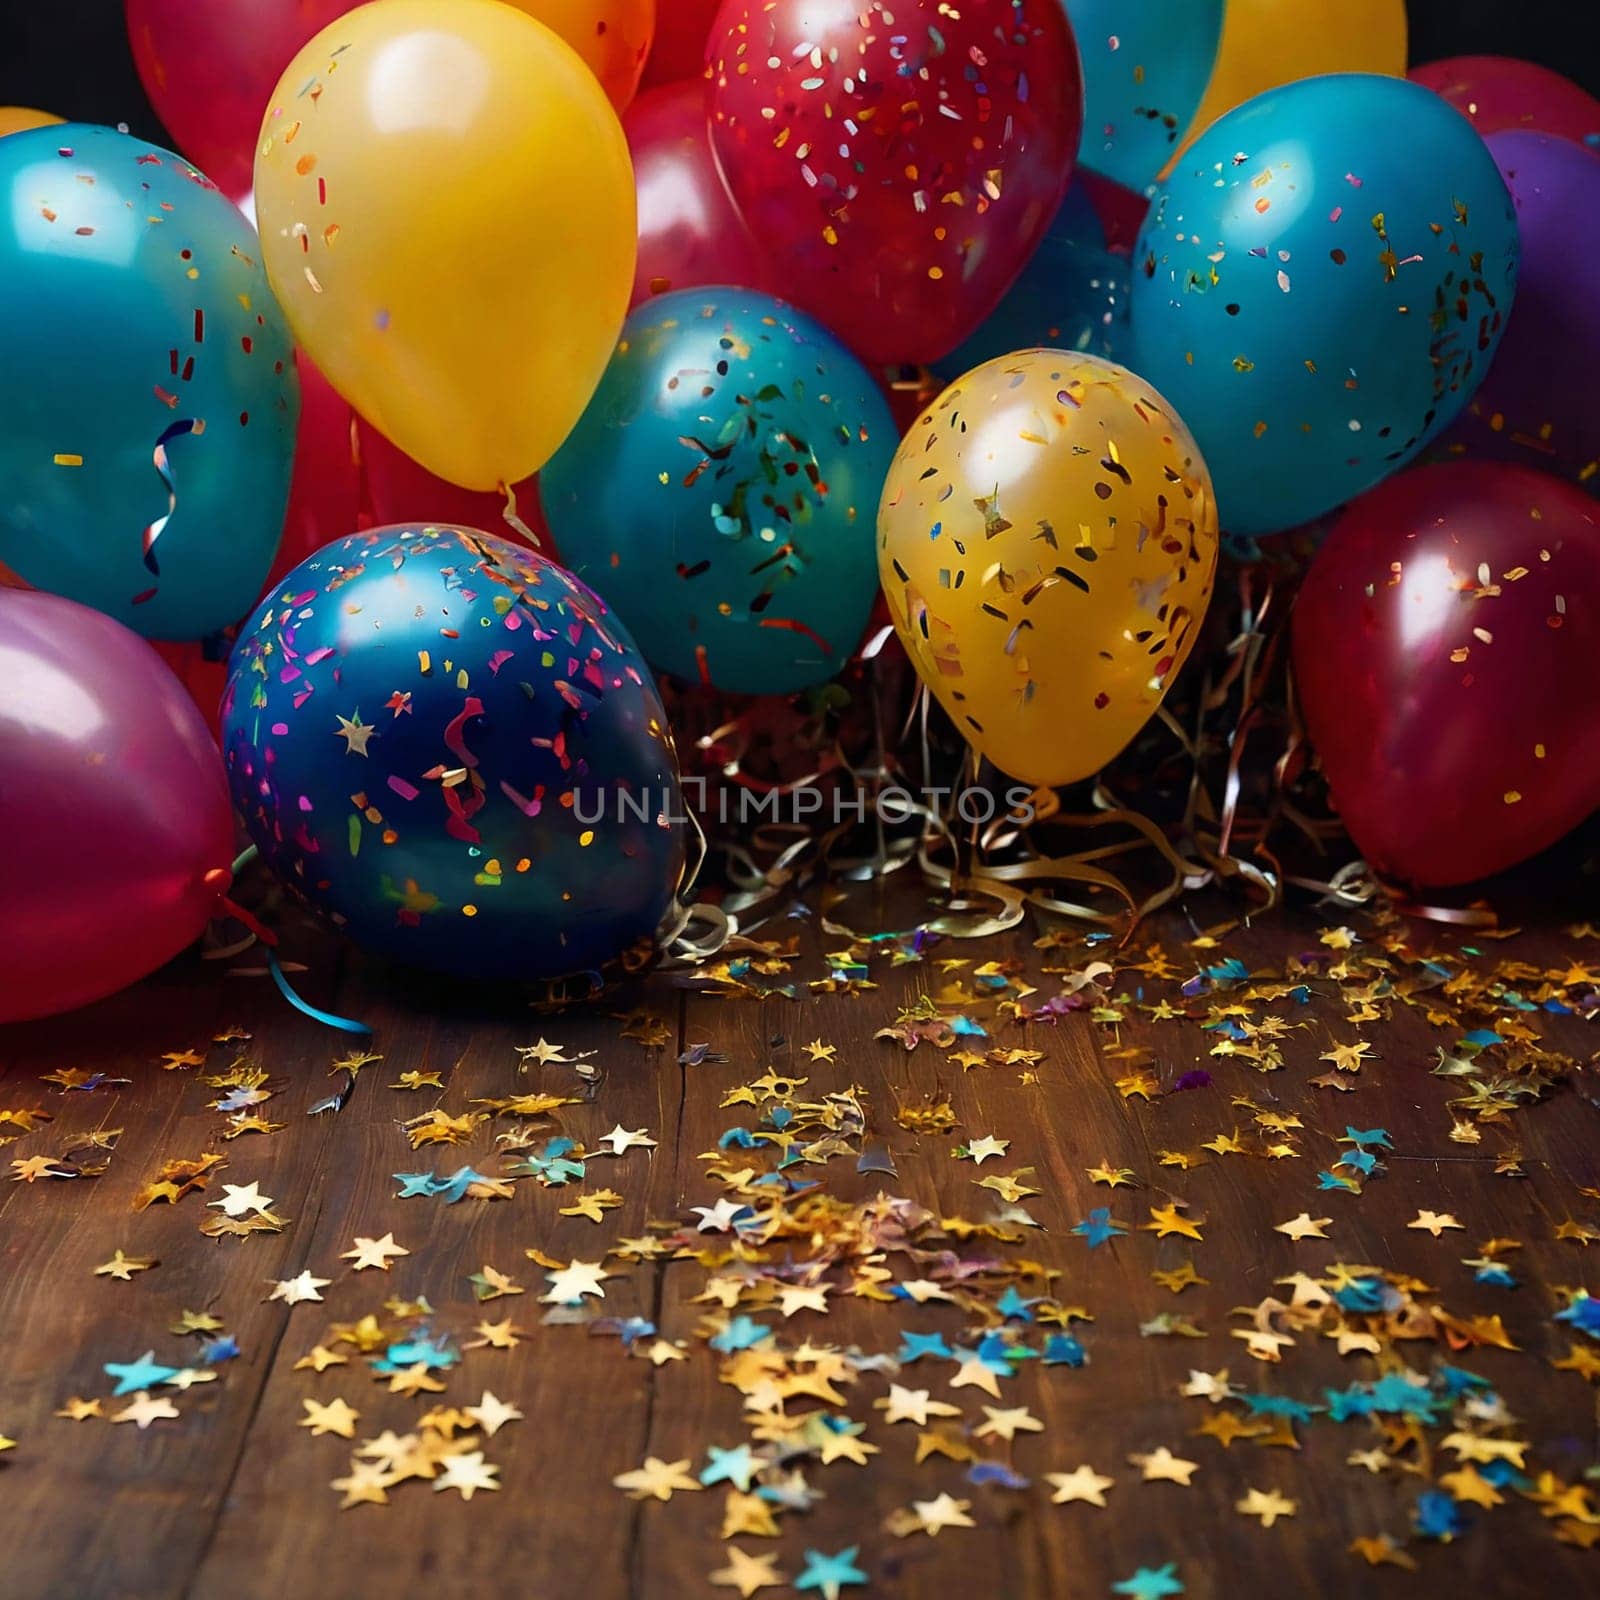 Lots of colorful festive balloons and confetti by VeronikaAngo